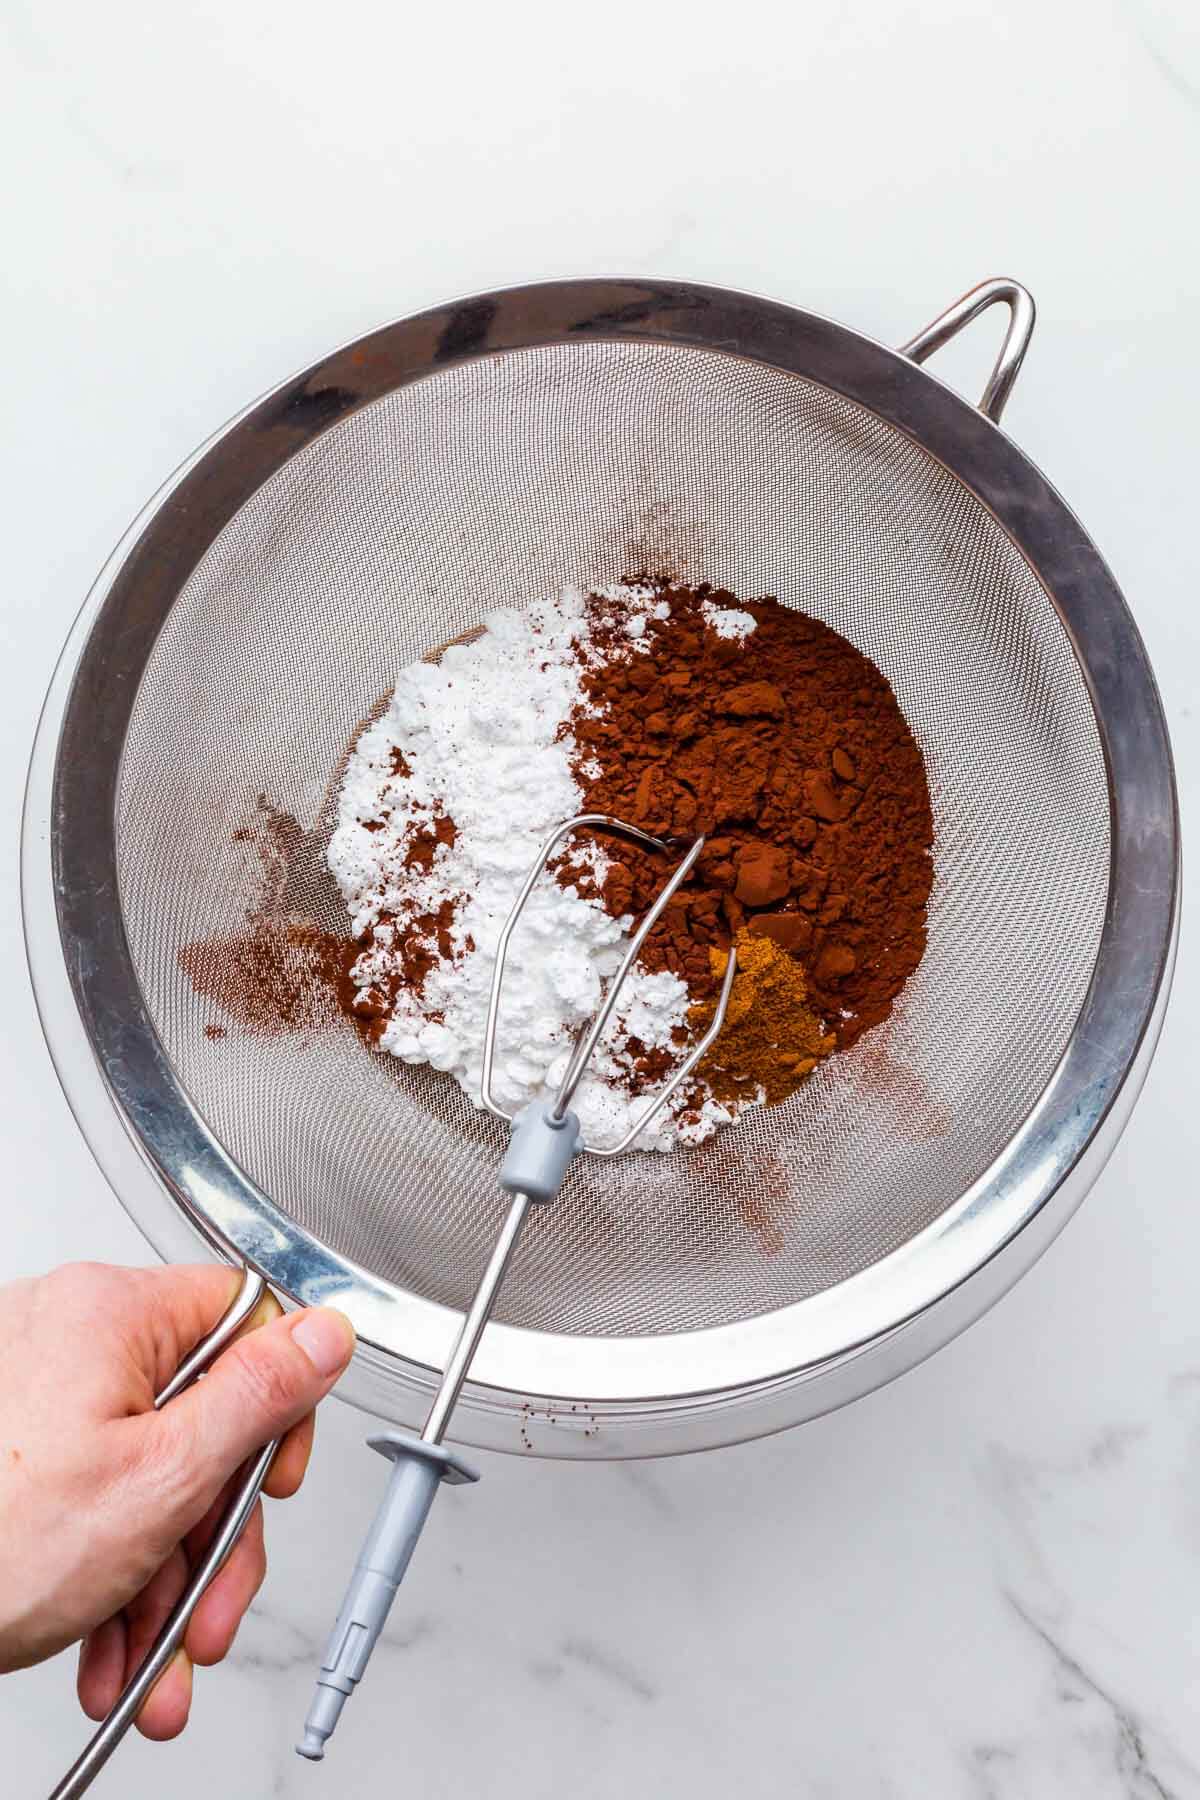 Sifting icing sugar and cocoa powder through a strainer to remove lumps to make smooth and creamy chocolate frosting.